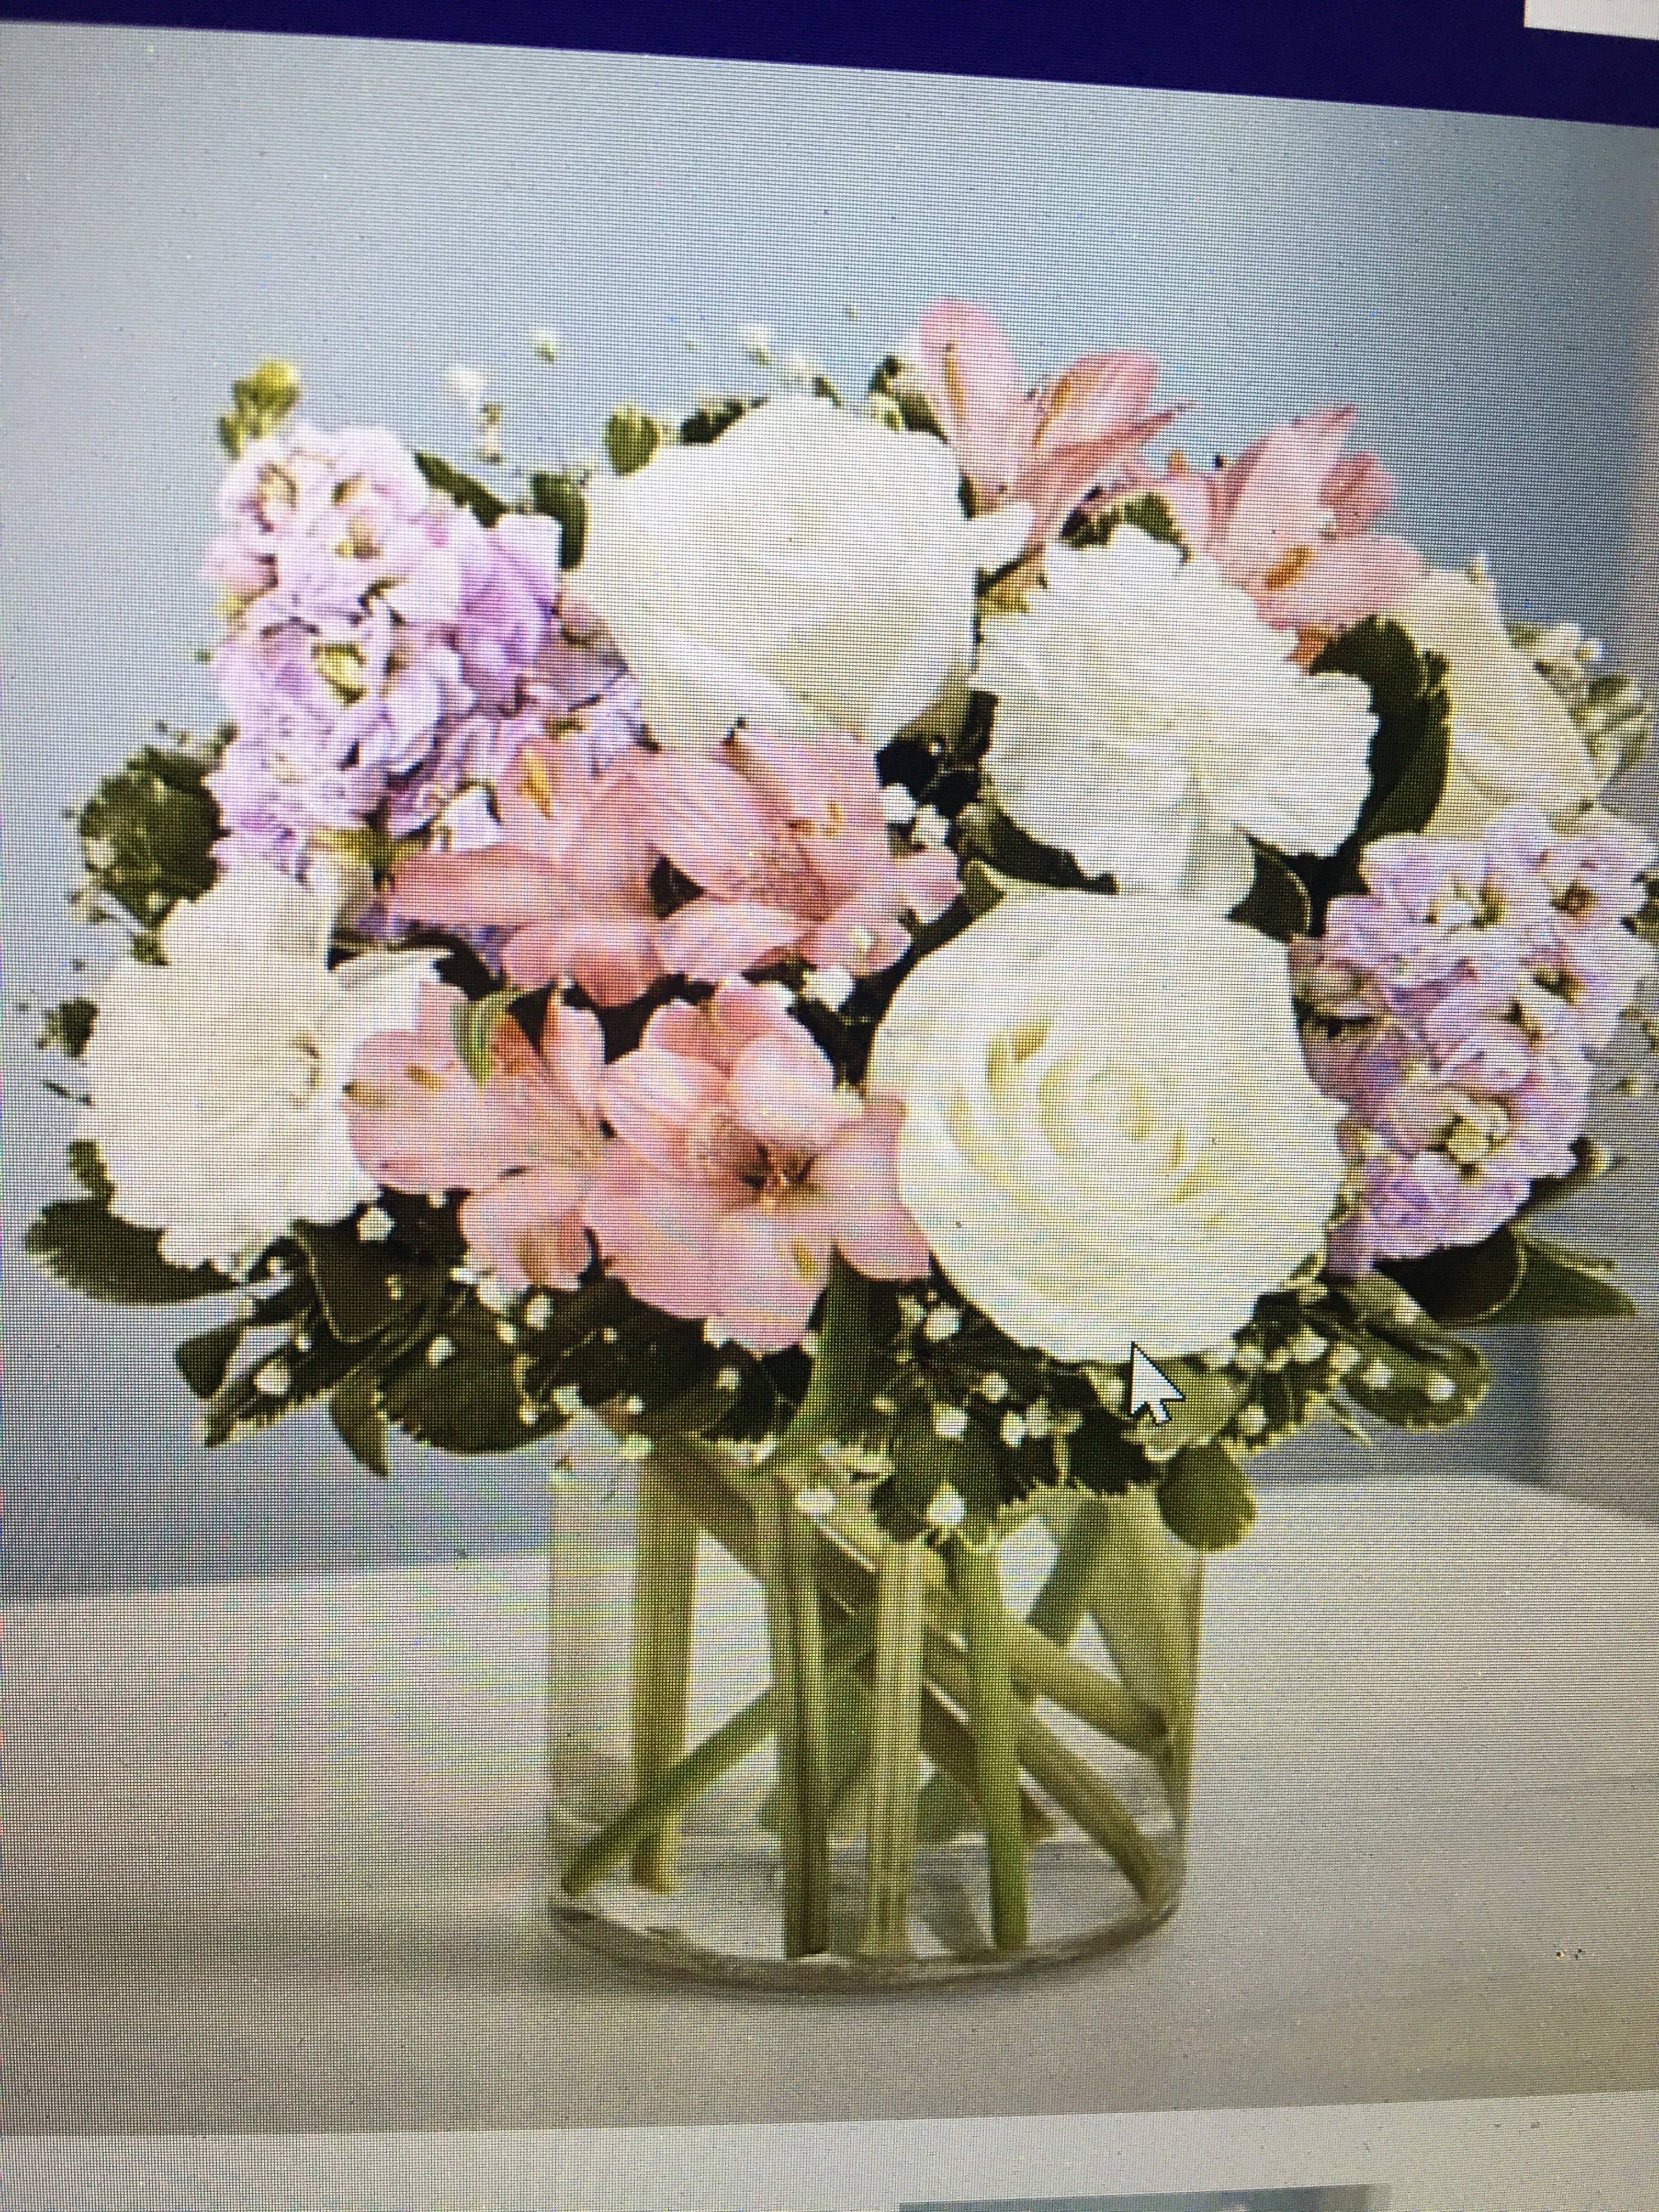 Elegant blush - Lavender pink and white flowers such as stock alstroemeria roses and carnations arranged in a clear vase